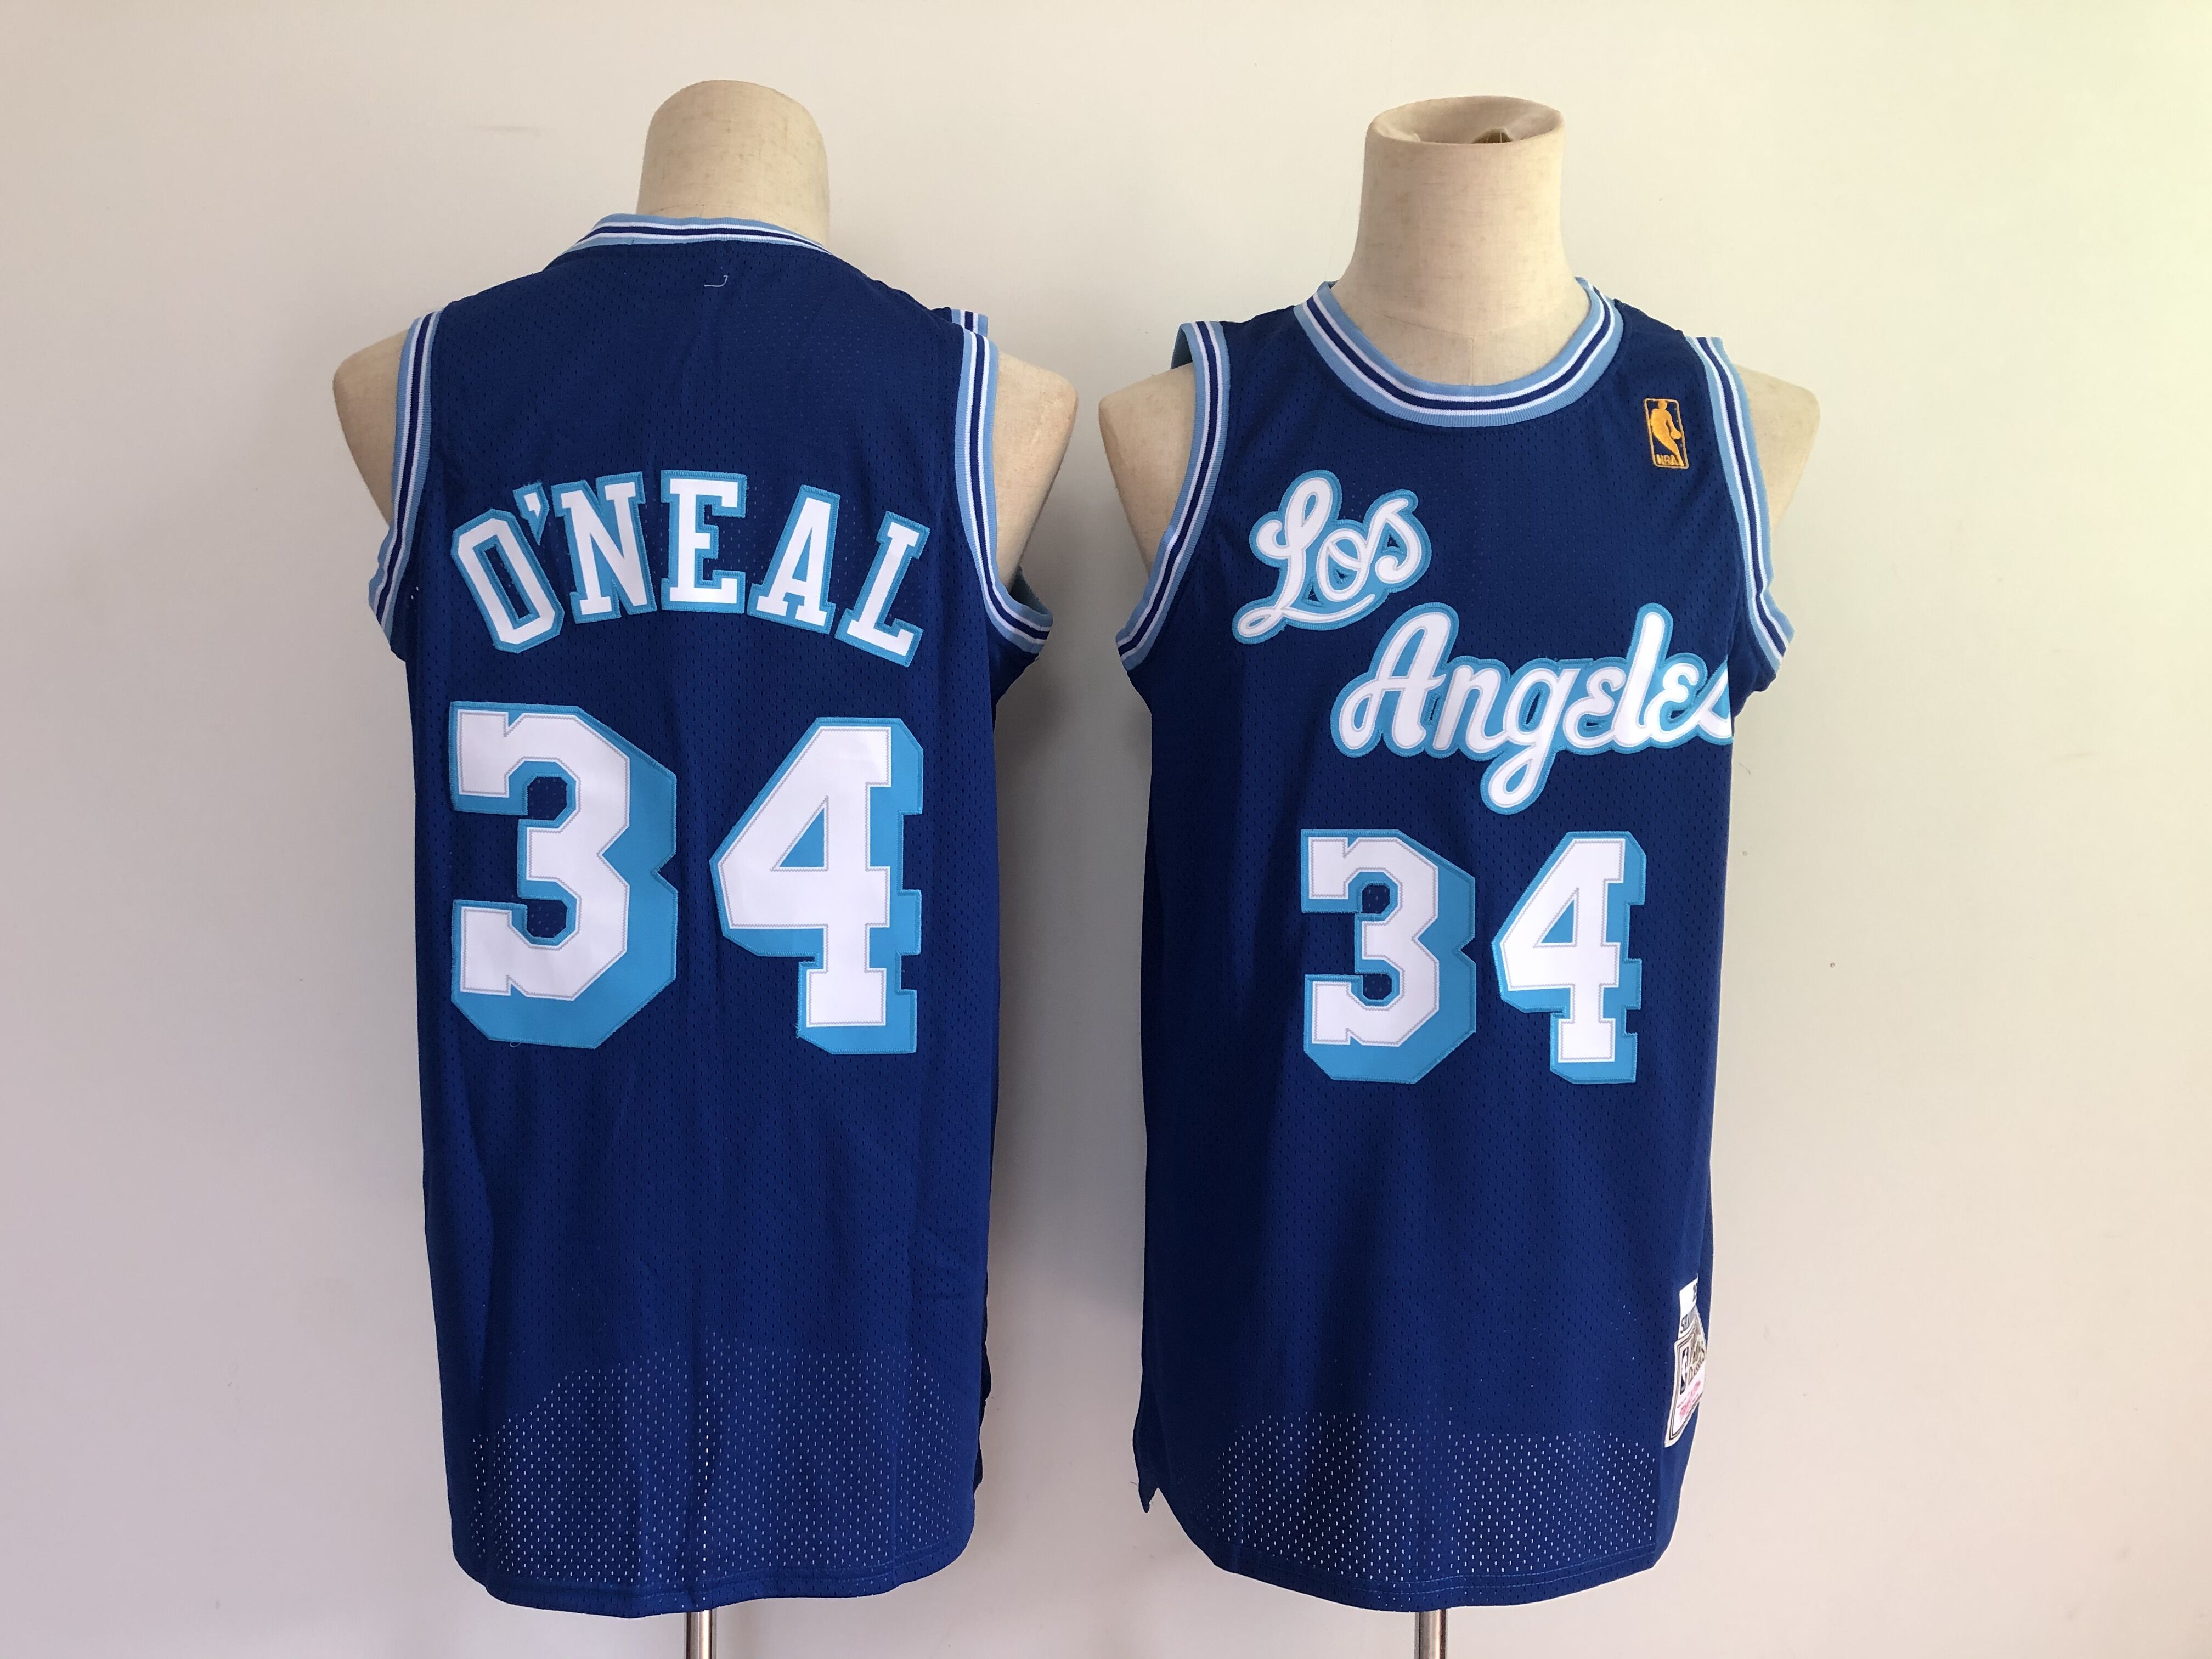 Lakers #34 Shaquille O'Neal Blue Throwback Stitched NBA Jersey